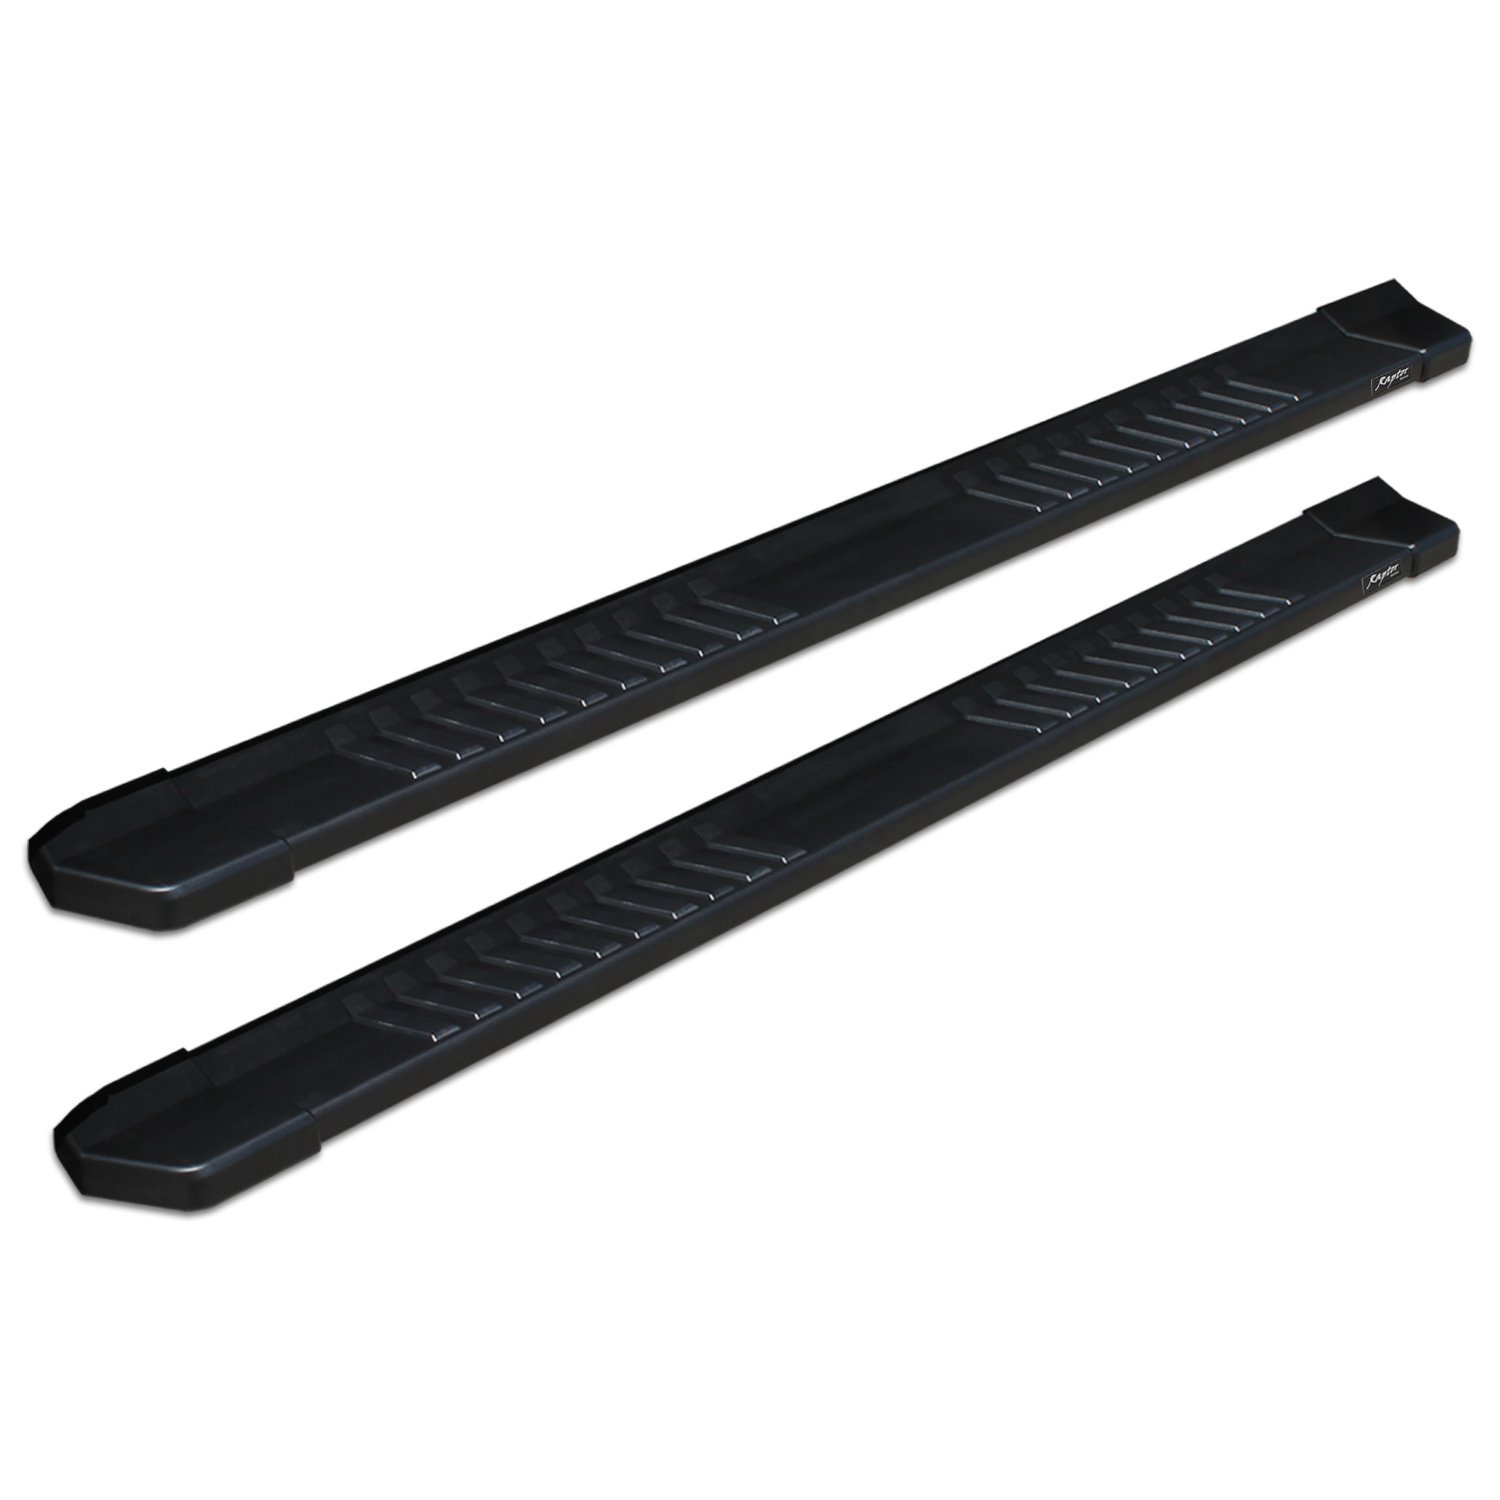 1702-0602BT 6 in OEM Style Slide Track Running Boards, Black Aluminum, Fits Select Dodge Ram 1500 New Body Style Crew Cab